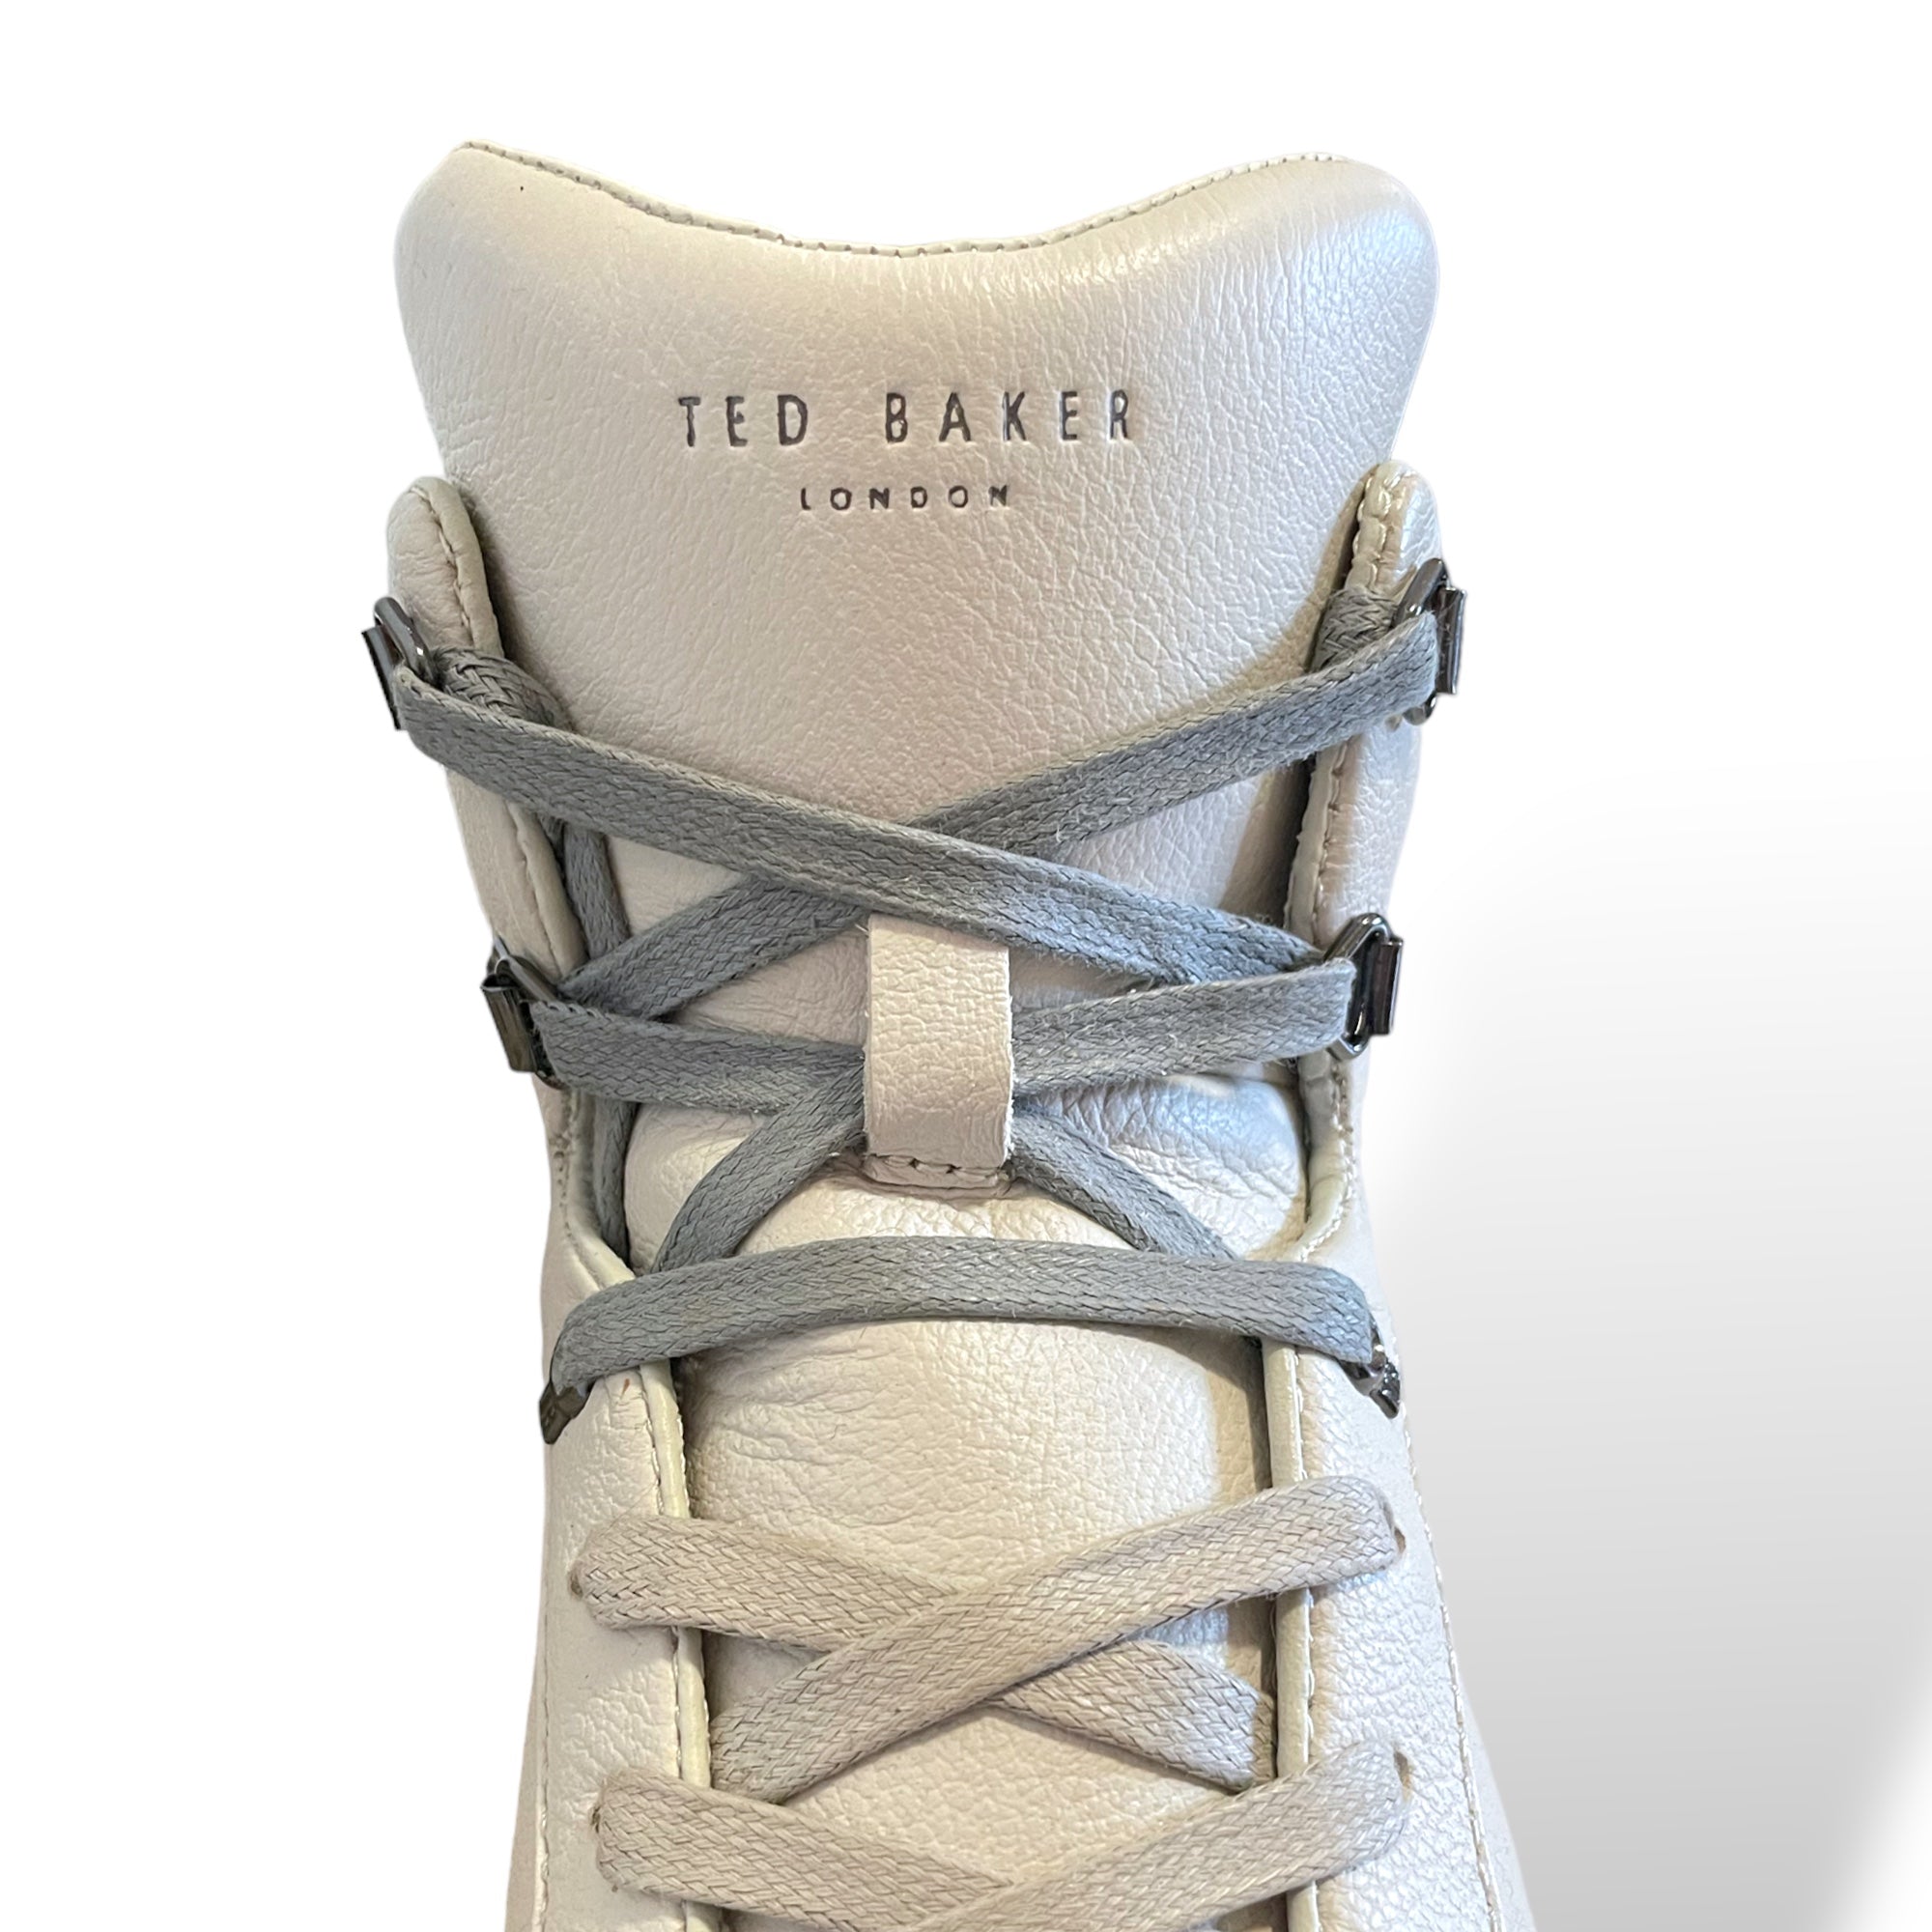 Mens TED BAKER London High-Top Sneakers |Size: 11US|